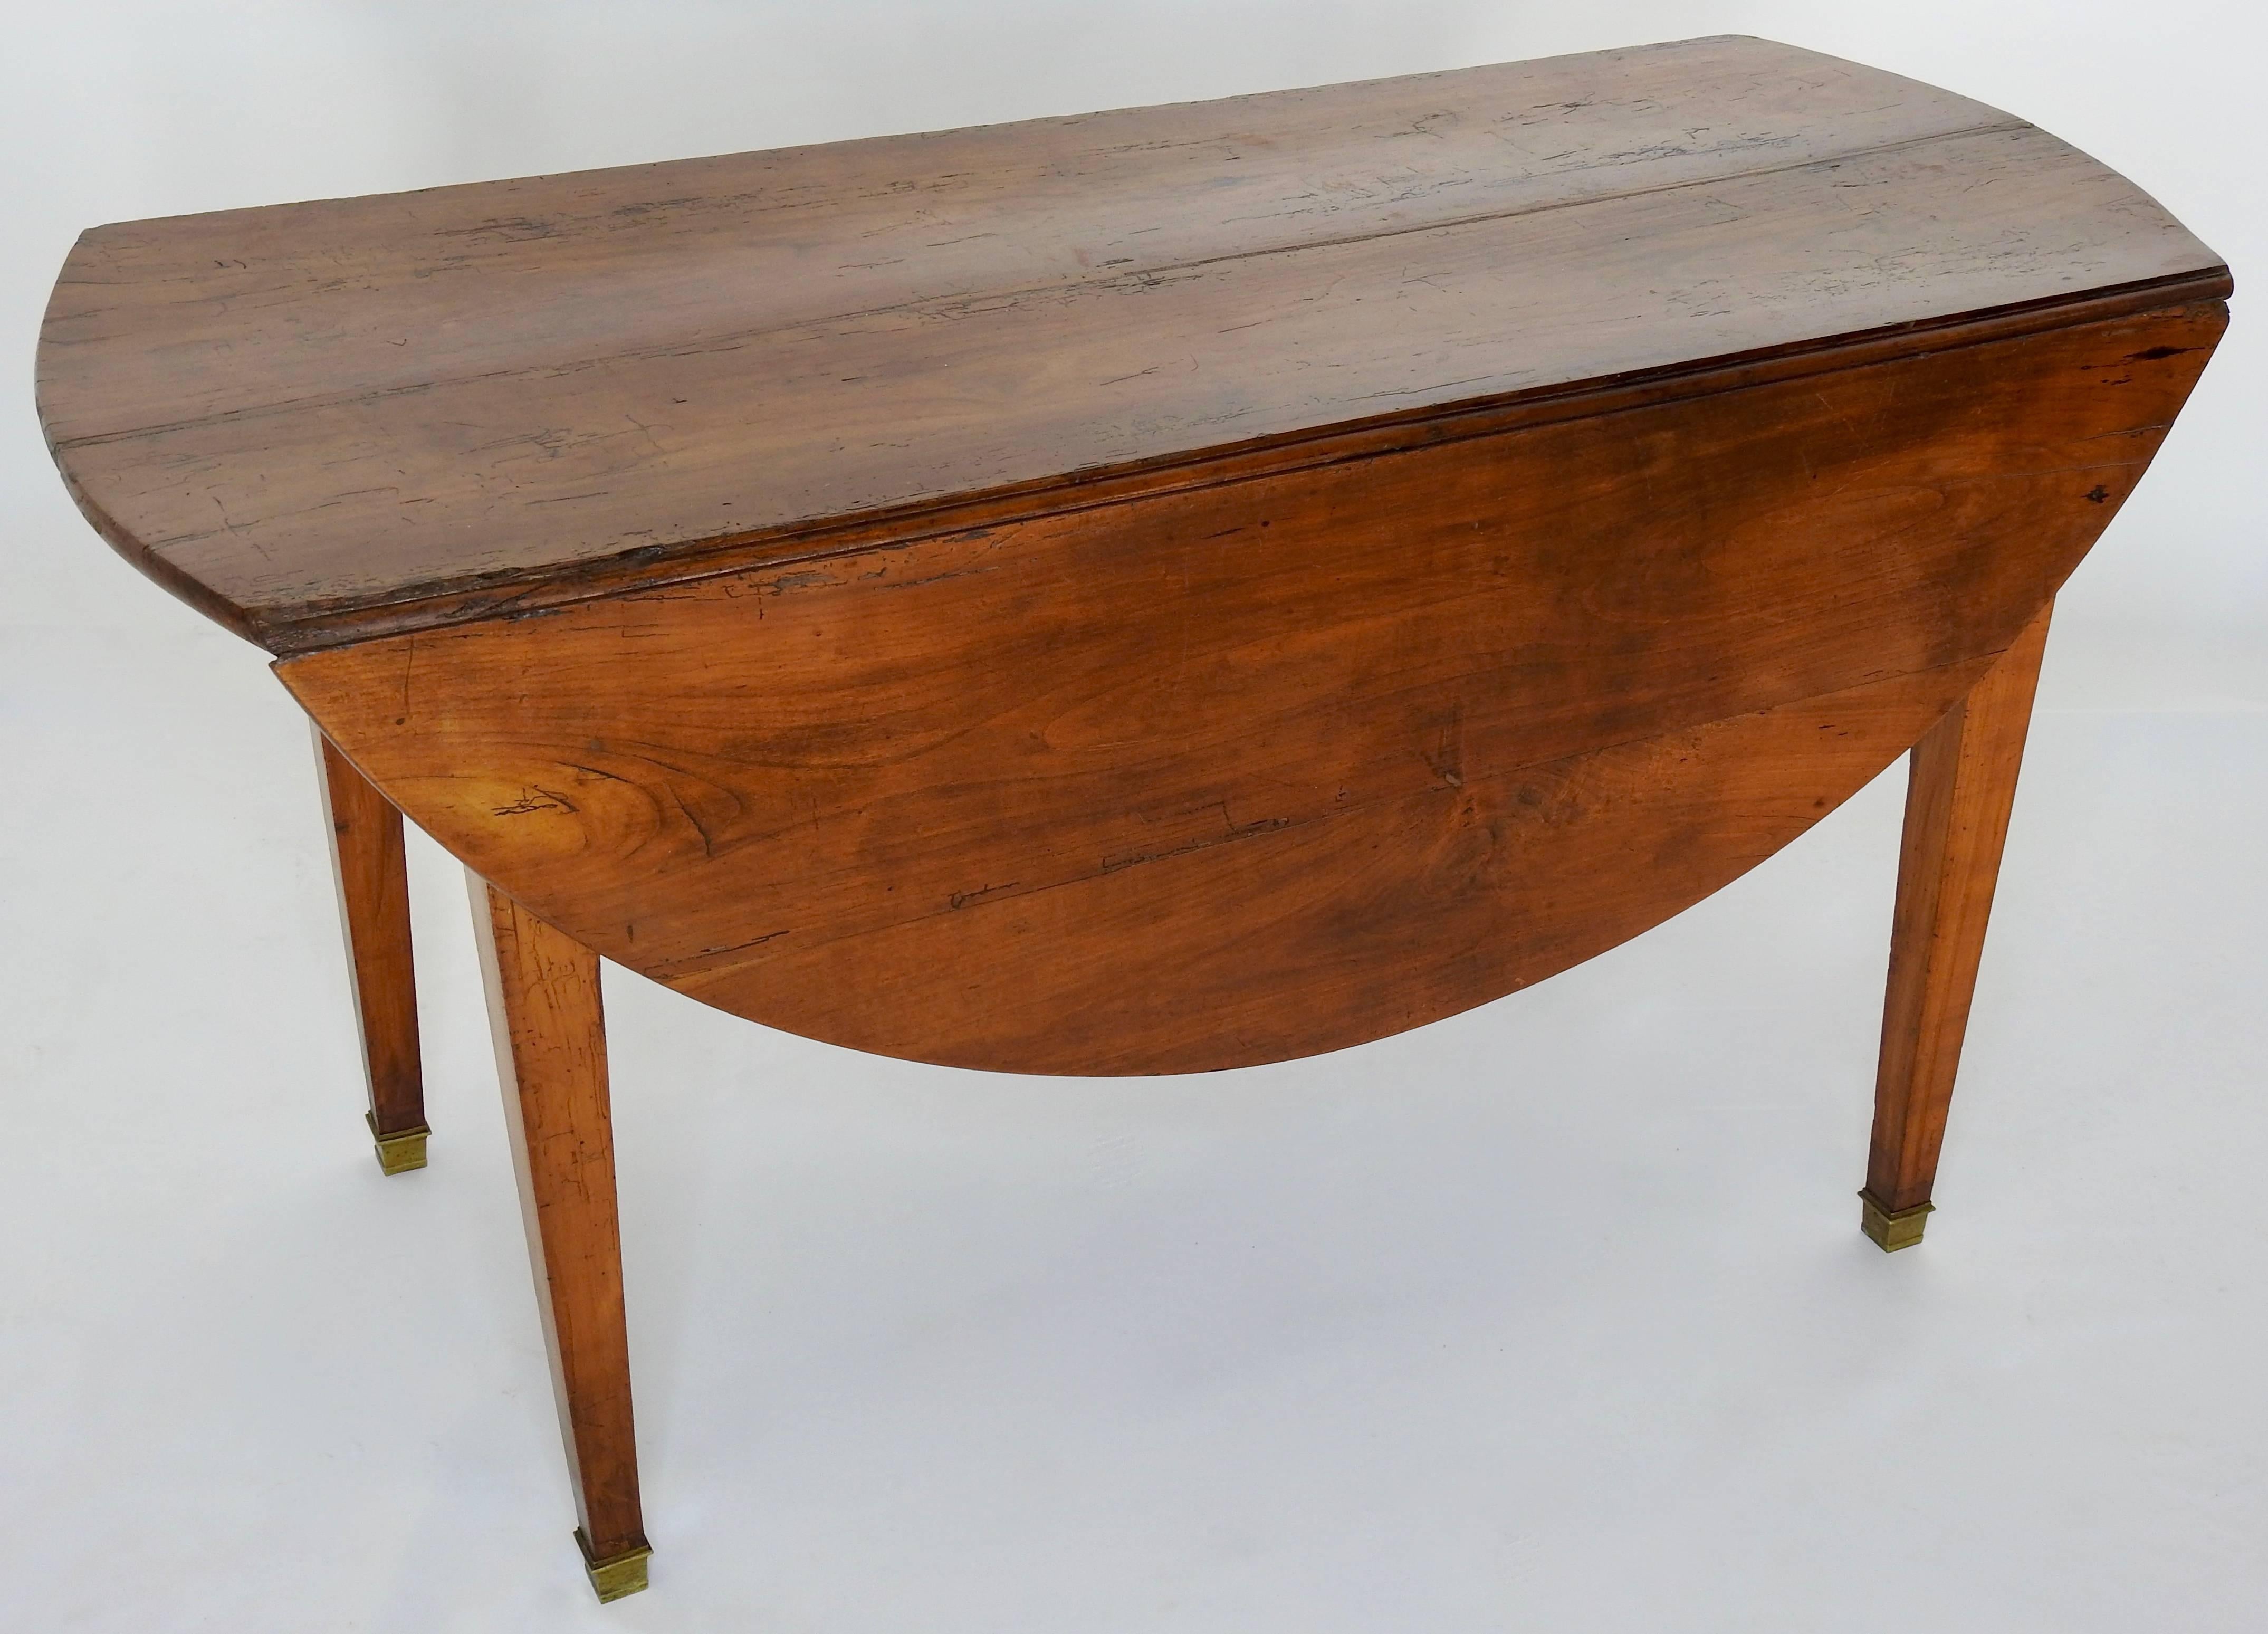 This is a classic drop-leaf table made of walnut from Italy. This warm toned table is a beauty. It sits atop square tapered legs that the ends are enveloped in brass with an aged patina. The top when let down is a narrow table with rounded ends and